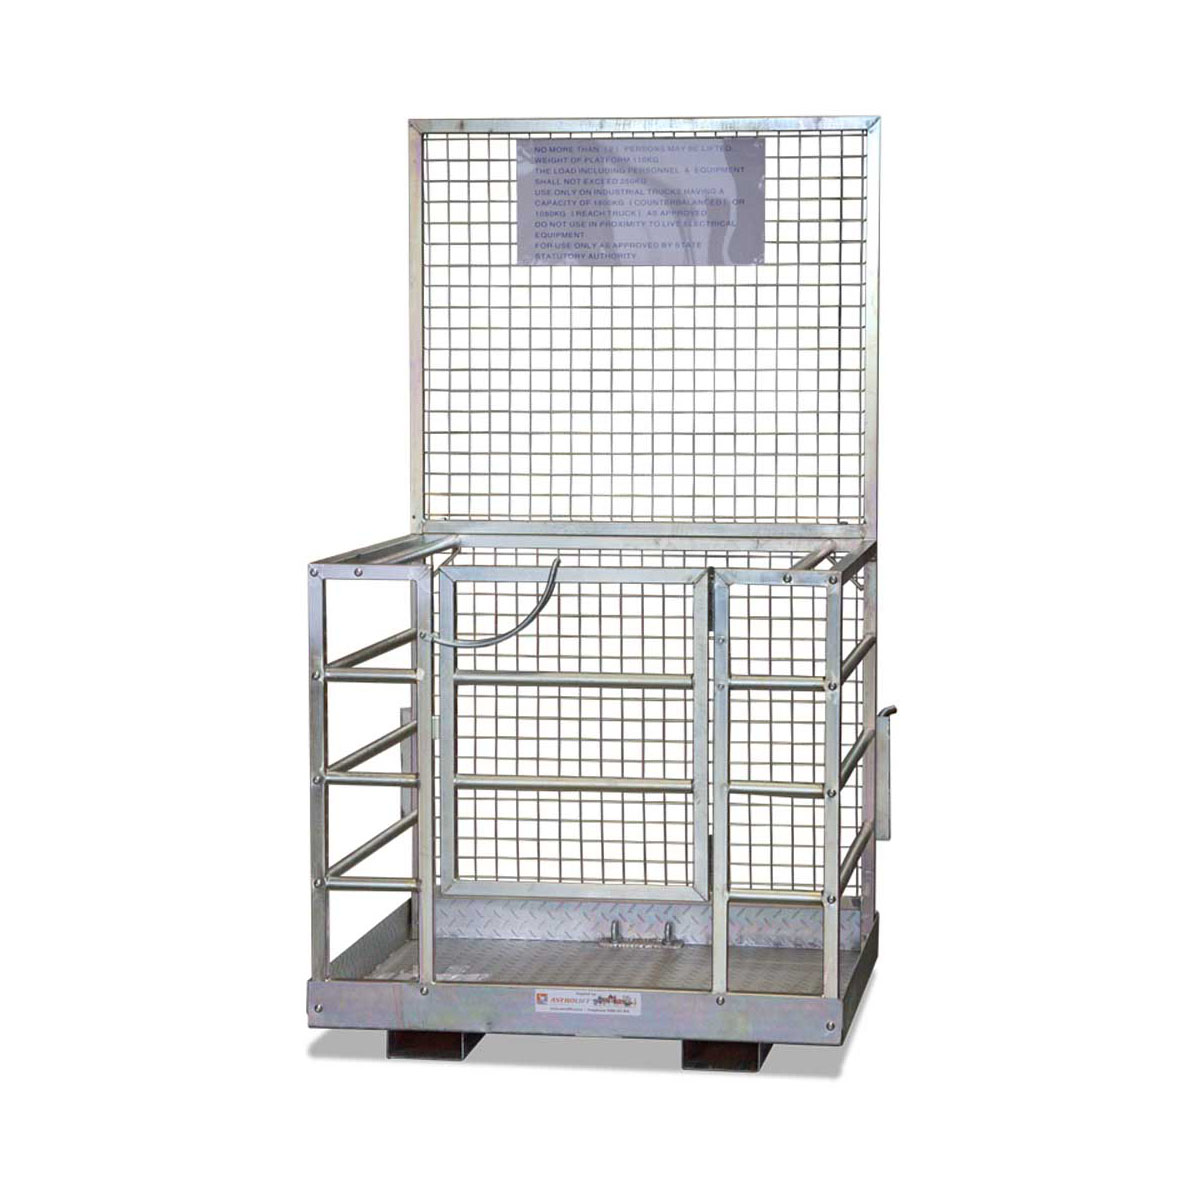 Buy Forklift Man Cage in Forklift Cages and Safety Gear from Astrolift NZ